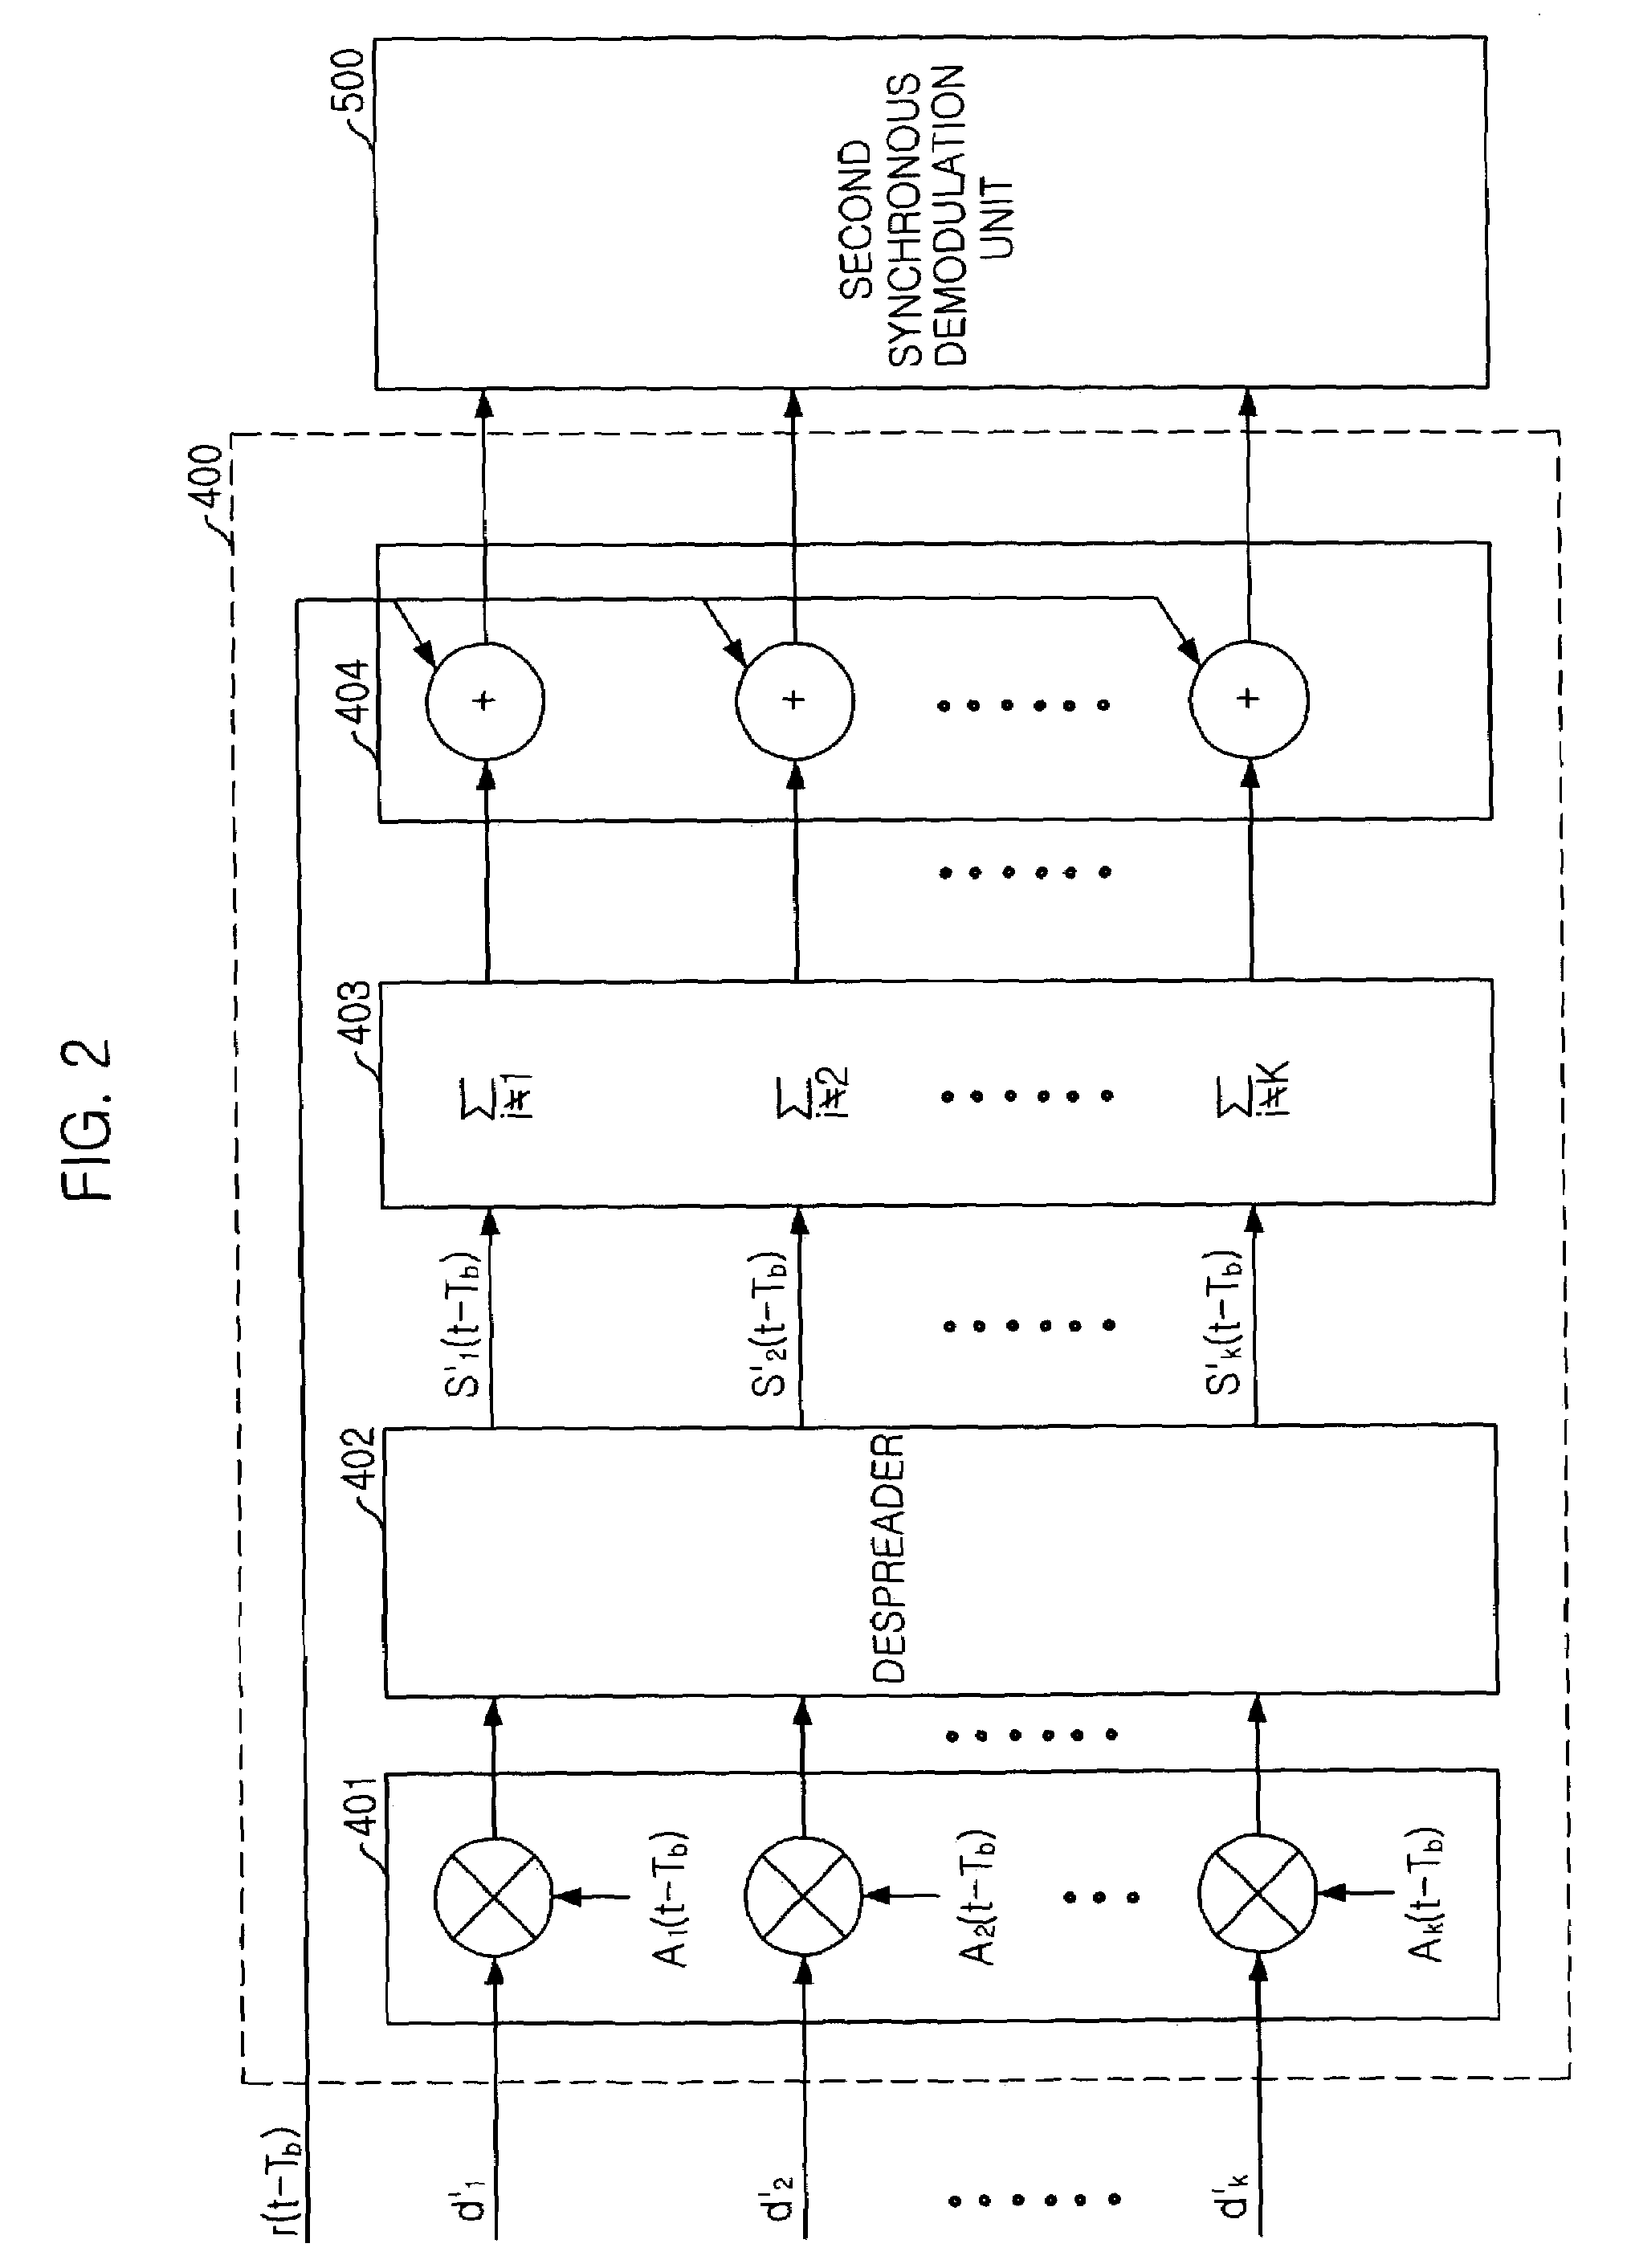 Synchronous demodulation apparatus of base transceiver station in interim standard-2000 system